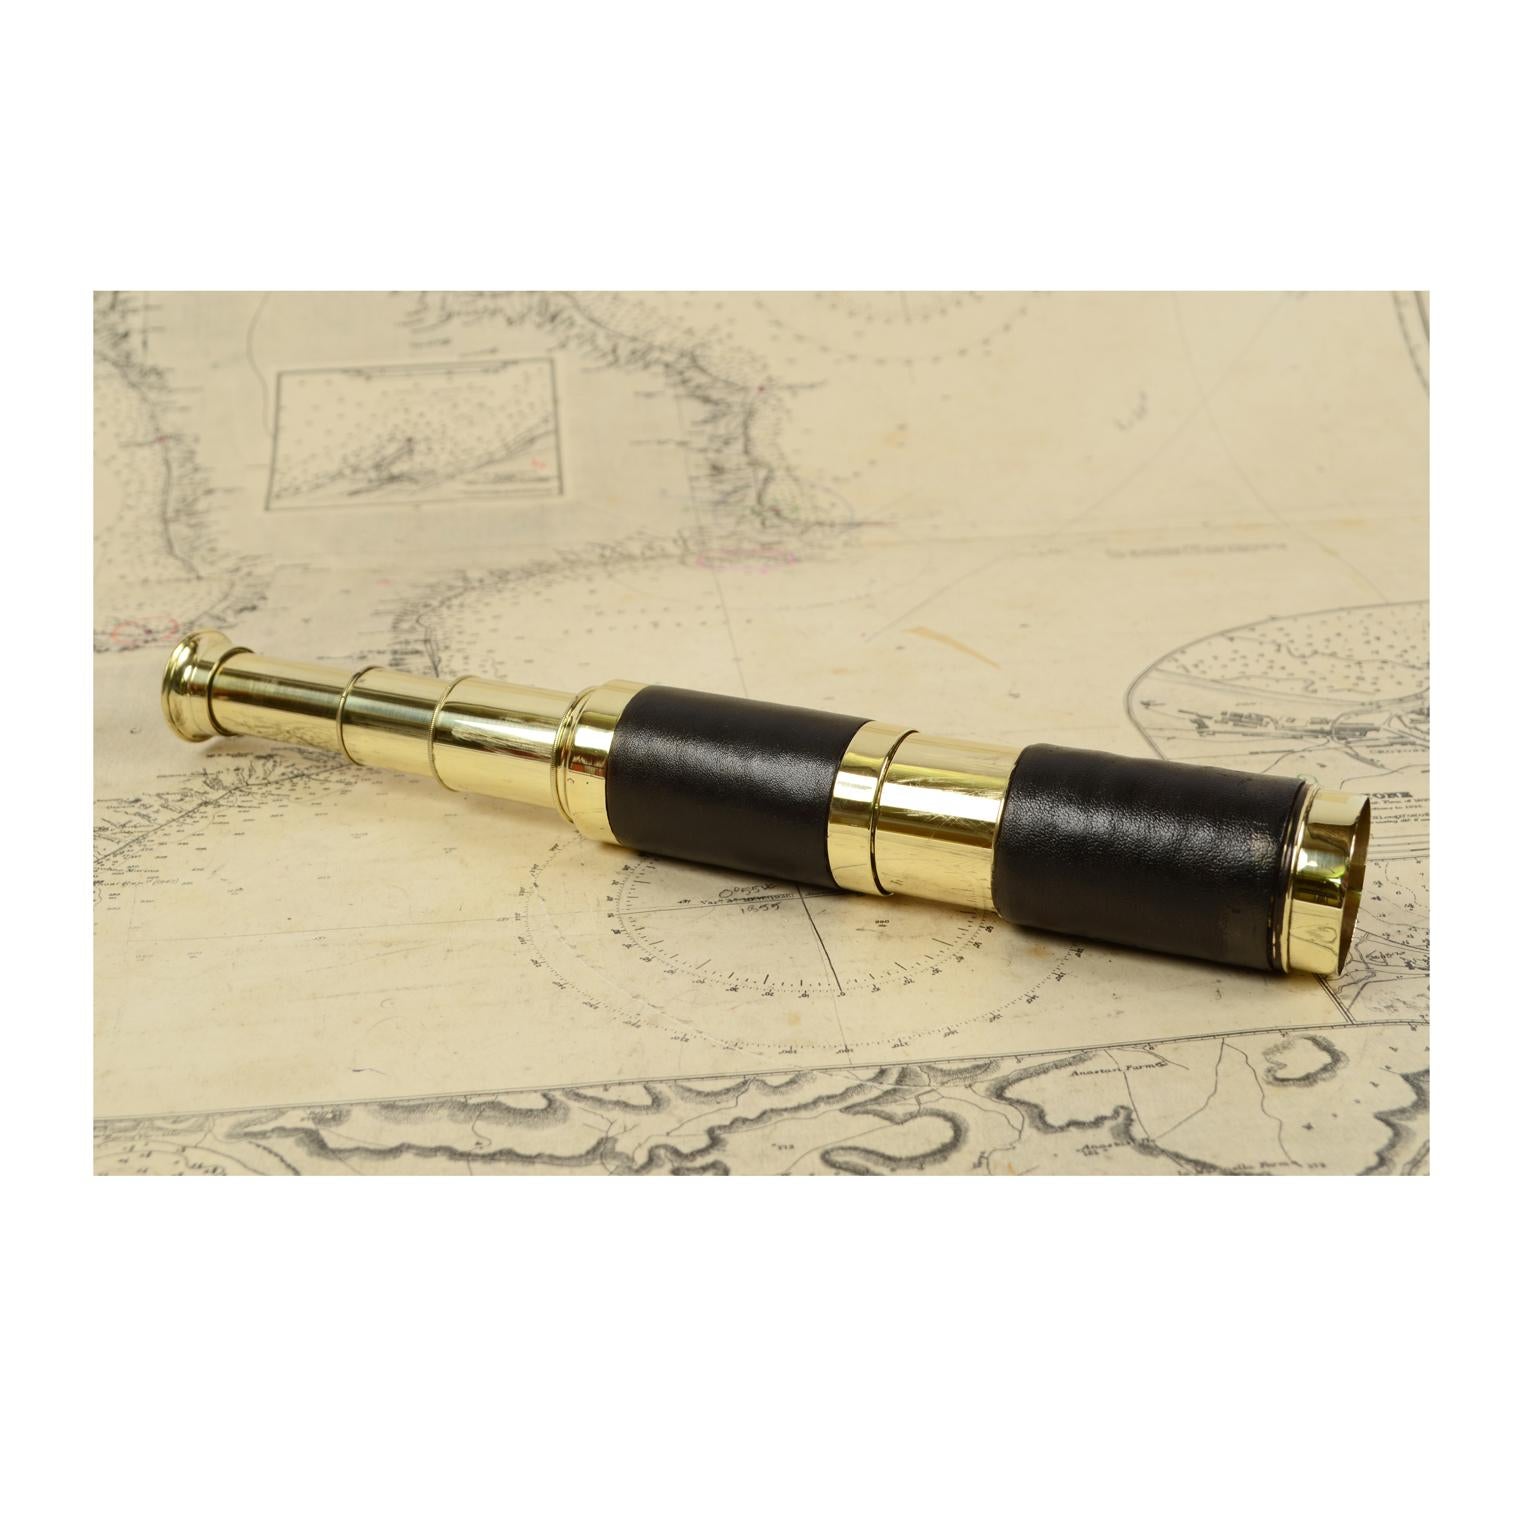 Brass telescope with leather-covered handle and three-extension focusing. Maximum length 51 cm, minimum length 17 cm, focal diameter 3 cm. Complete with sunshade extension and dust flap. French manufacture of the second half of the 19th century. In